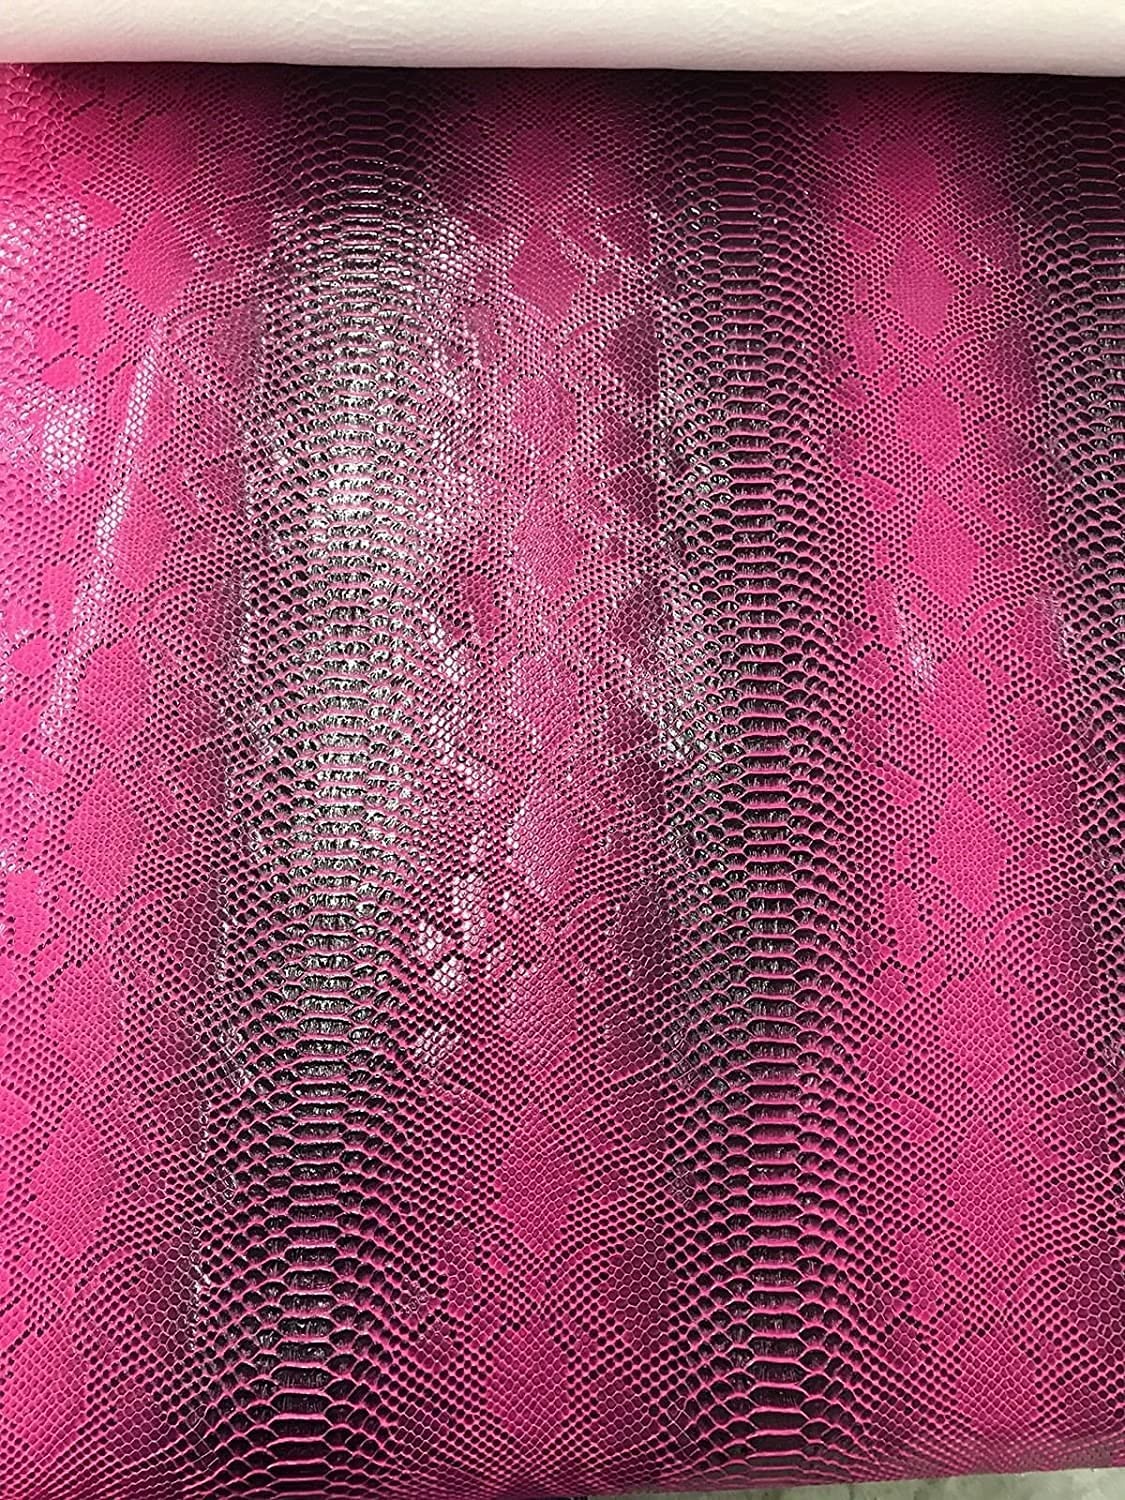 53/54" Wide Snake Fake Leather Upholstery, 3-D Viper Snake Skin Texture Faux Leather PVC Vinyl Fabric by The Yard. (1 Yard, Magenta)